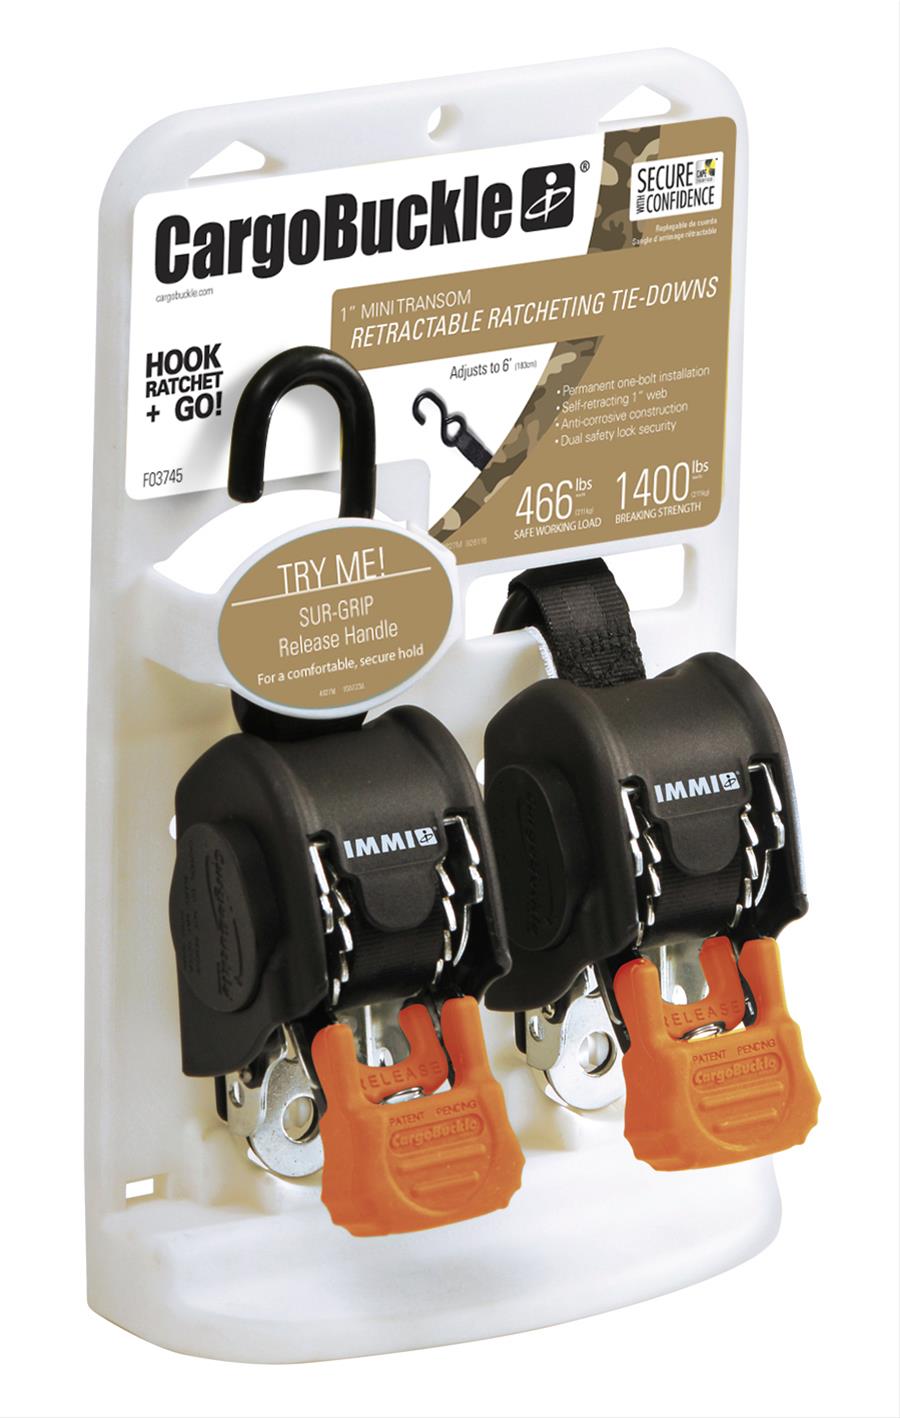 2 SETS OF 2 EACH SET: Tie-Down Straps, CargoBuckle Mini G3 Retractable Tie-Downs, Ratchet Adjustment, S-hook, 467 lbs. Working Load, Black, 6 ft. Length - 2 ADDITIONAL S-HOOKS FOR EACH SET SO EACH HAVE AN S-HOOK ON BOTH END